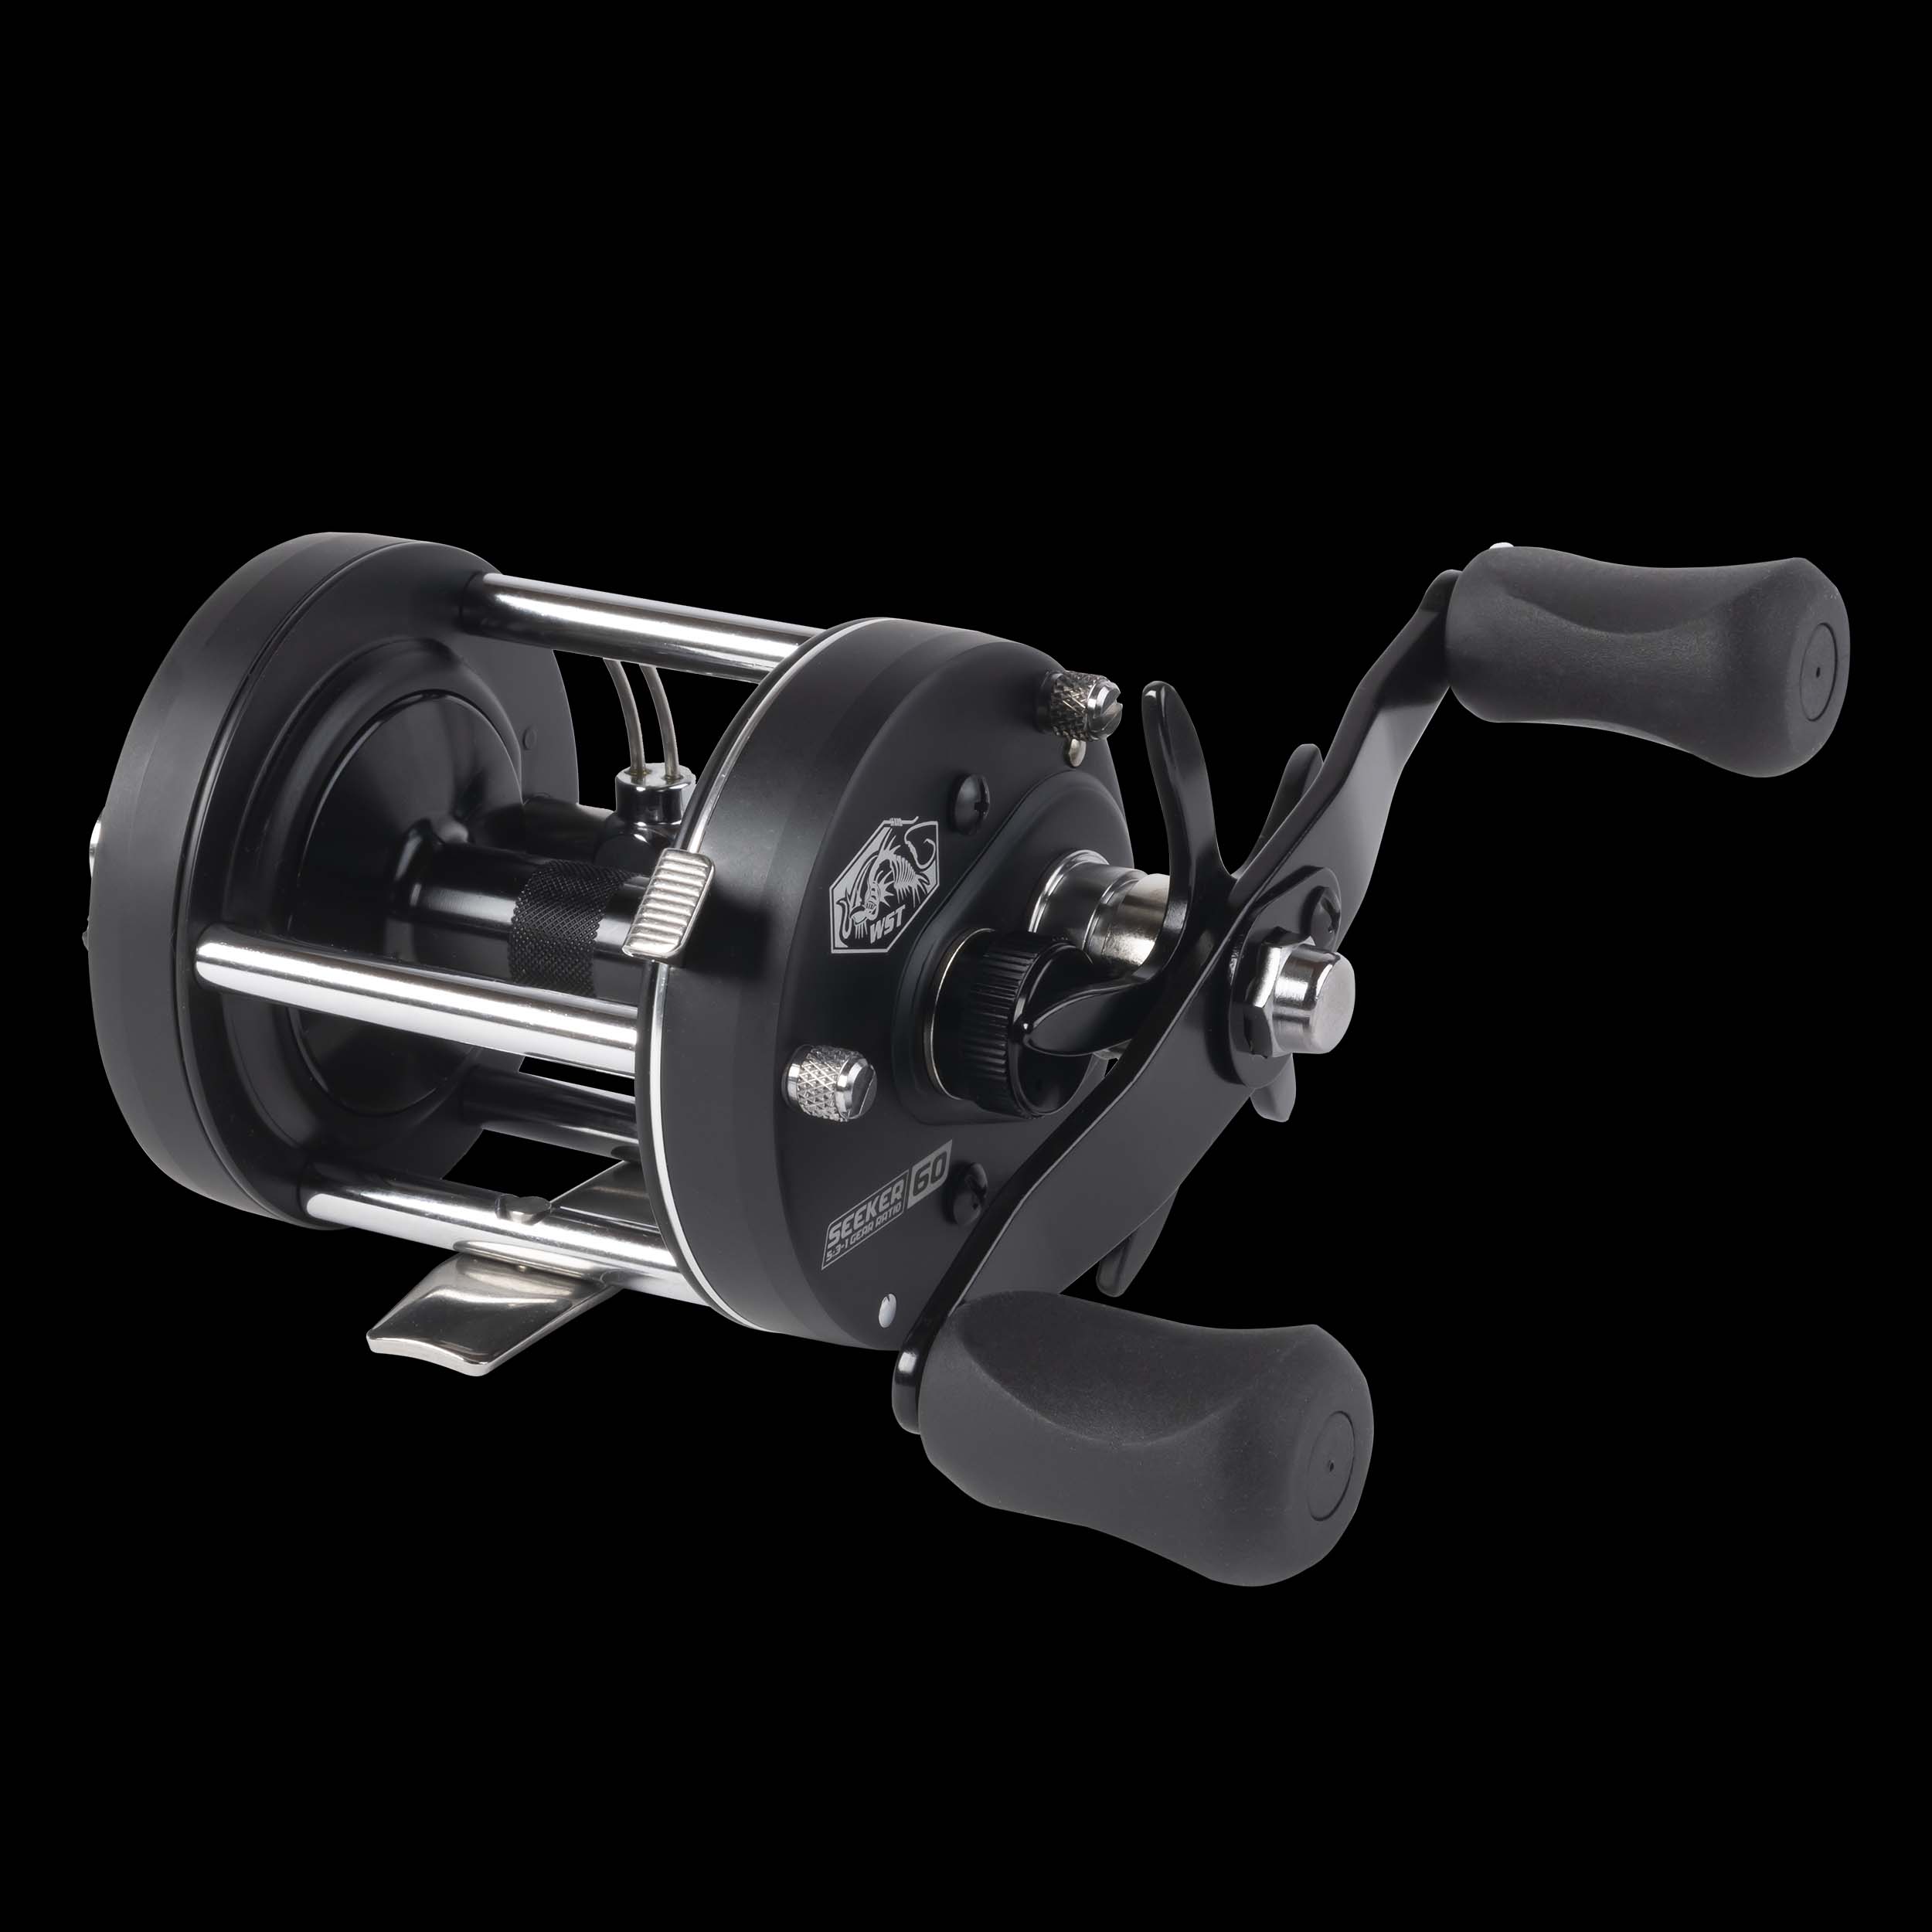 Baitcaster Reels, CNC Aluminum Spool, Magnetic Brake System Bait Caster  Reel High Speed Gear Ratio Ultra Smooth Low Profile Baitcasting Fishing Reel